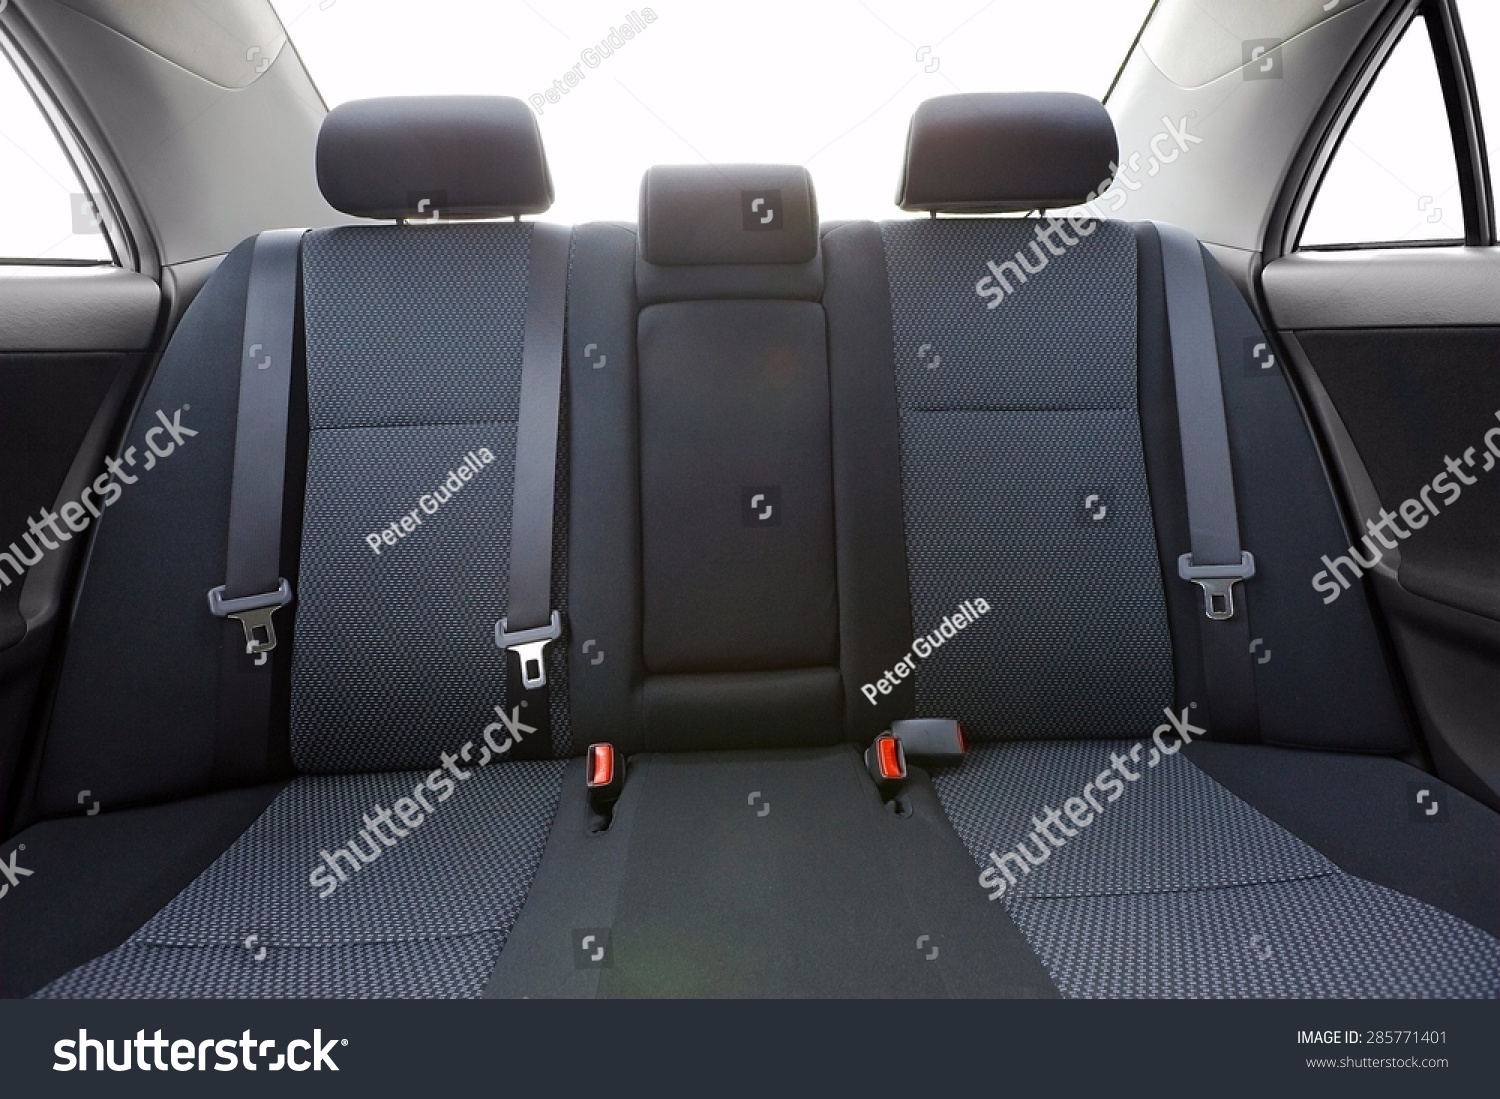 Car backseats with intentional light flare from the burnt out background #285771401